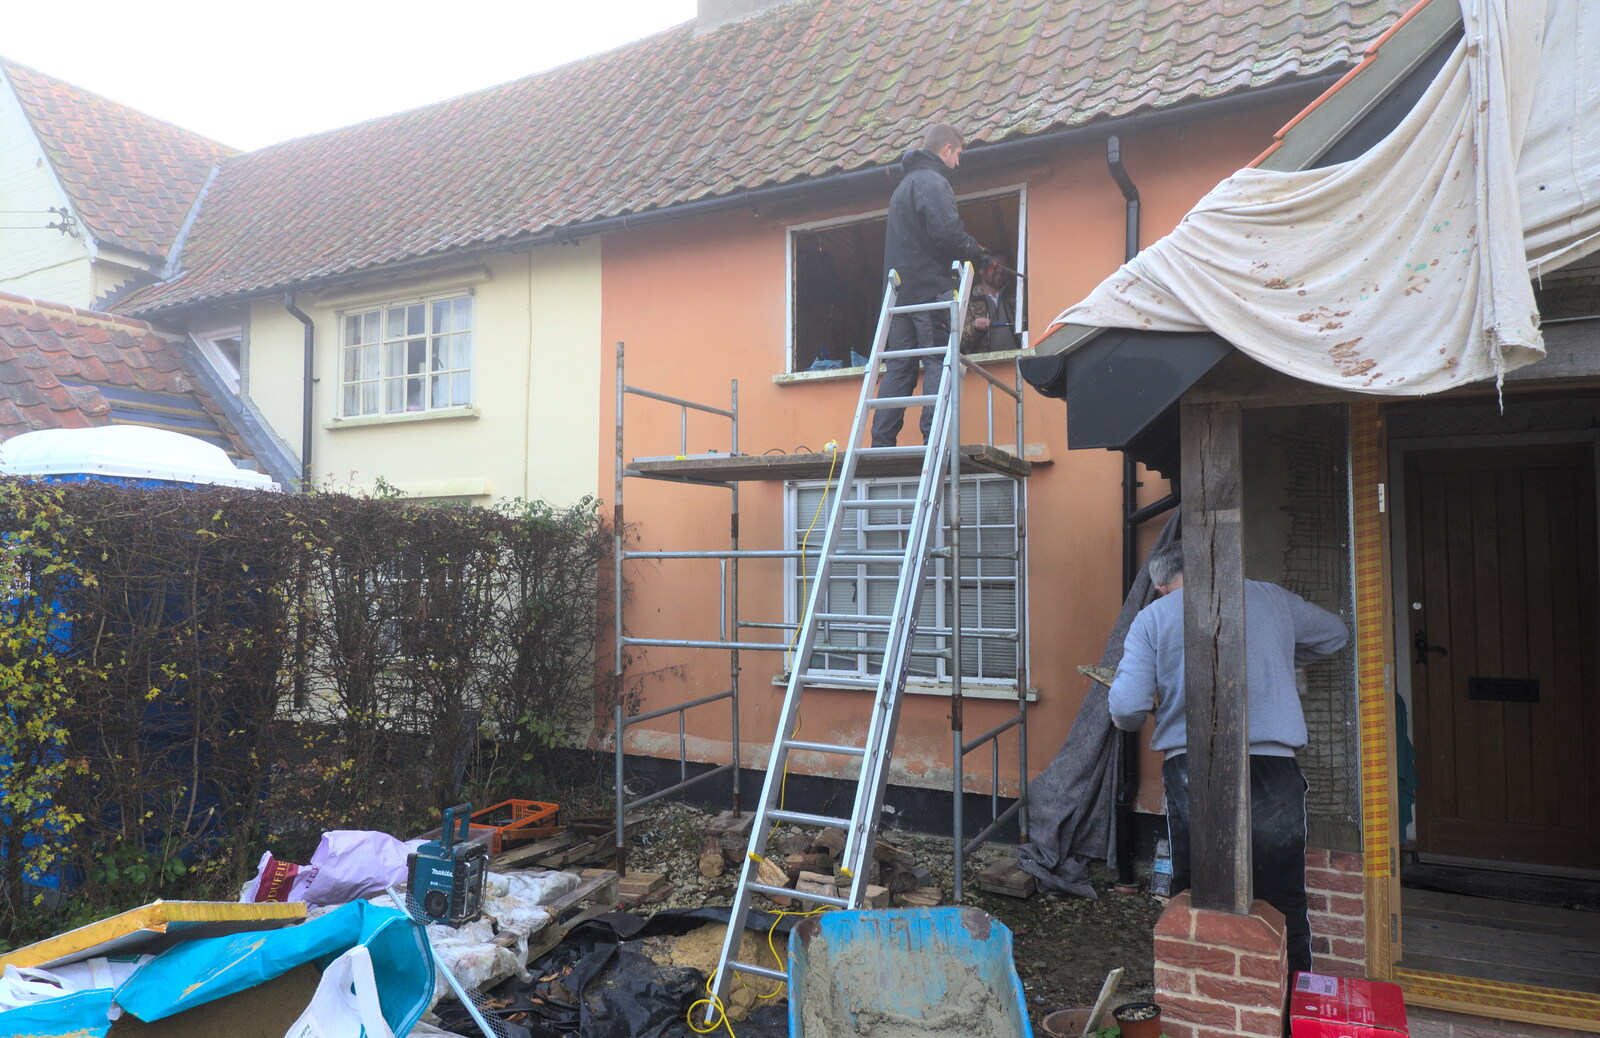 Builders are everywhere from Jack's Birthday and New Windows, Brome and Brockdish, Norfolk - 4th December 2016